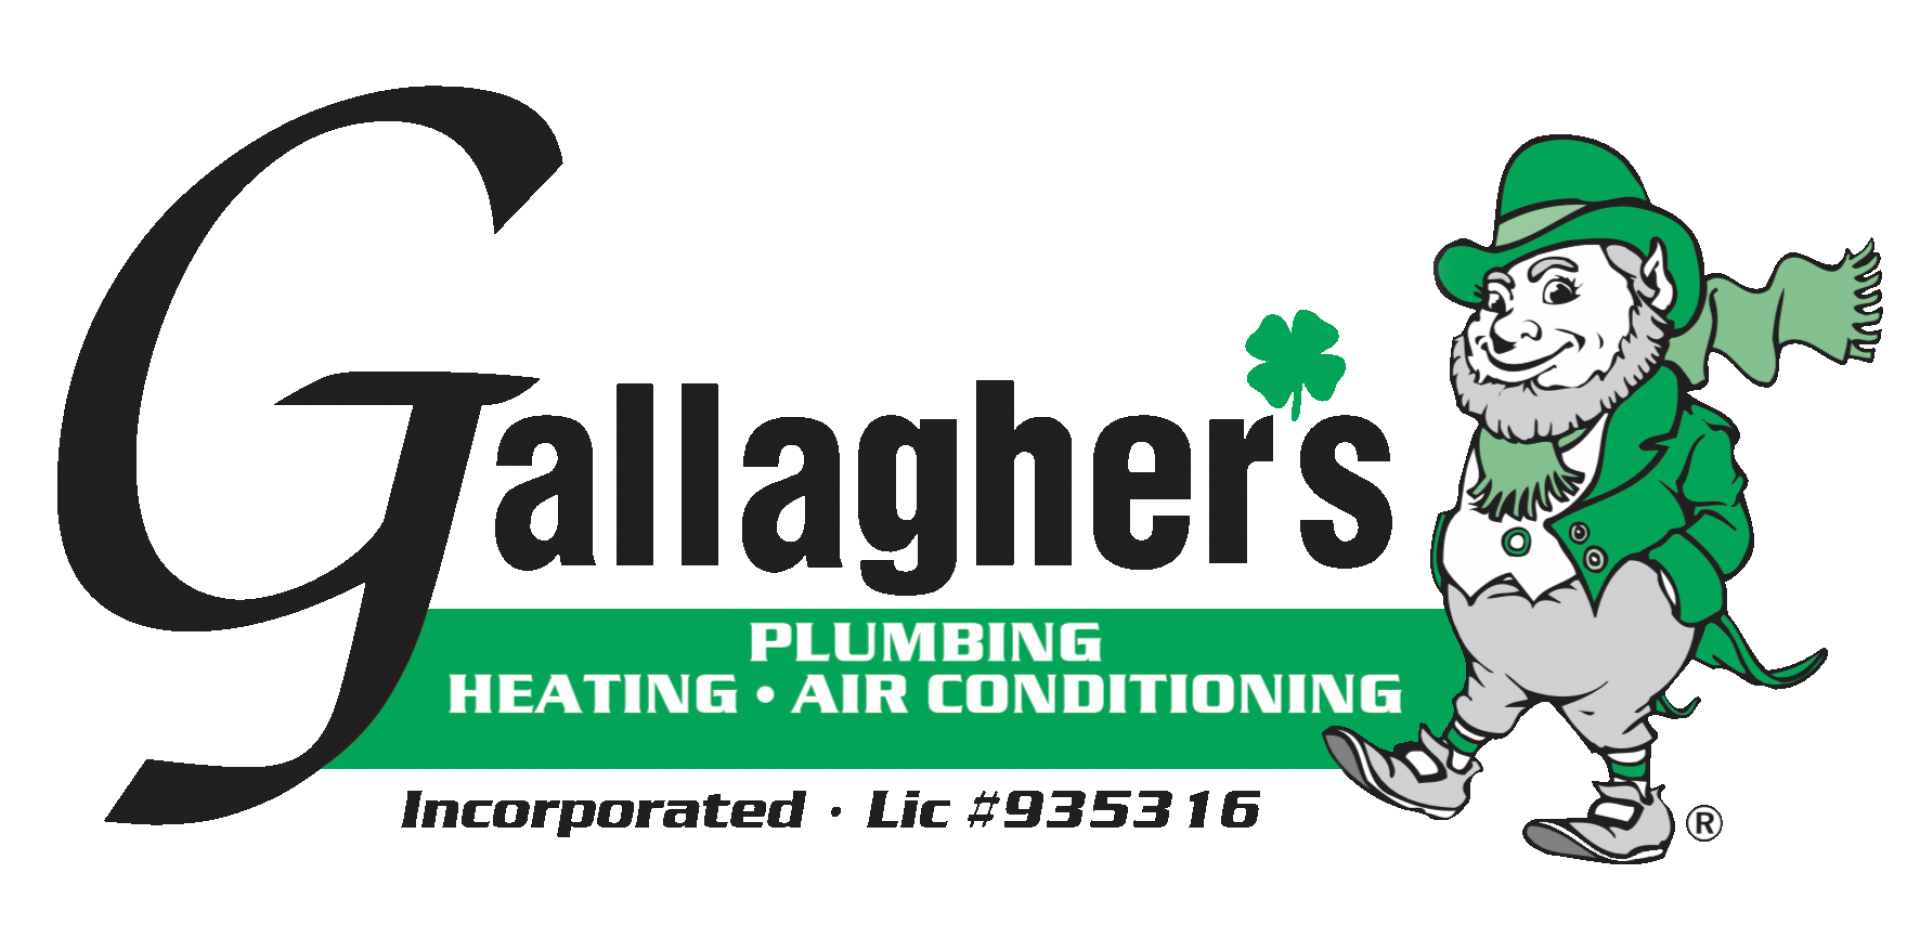 Gallagher's Plumbing, Heating & Air Conditioning, Inc company logo